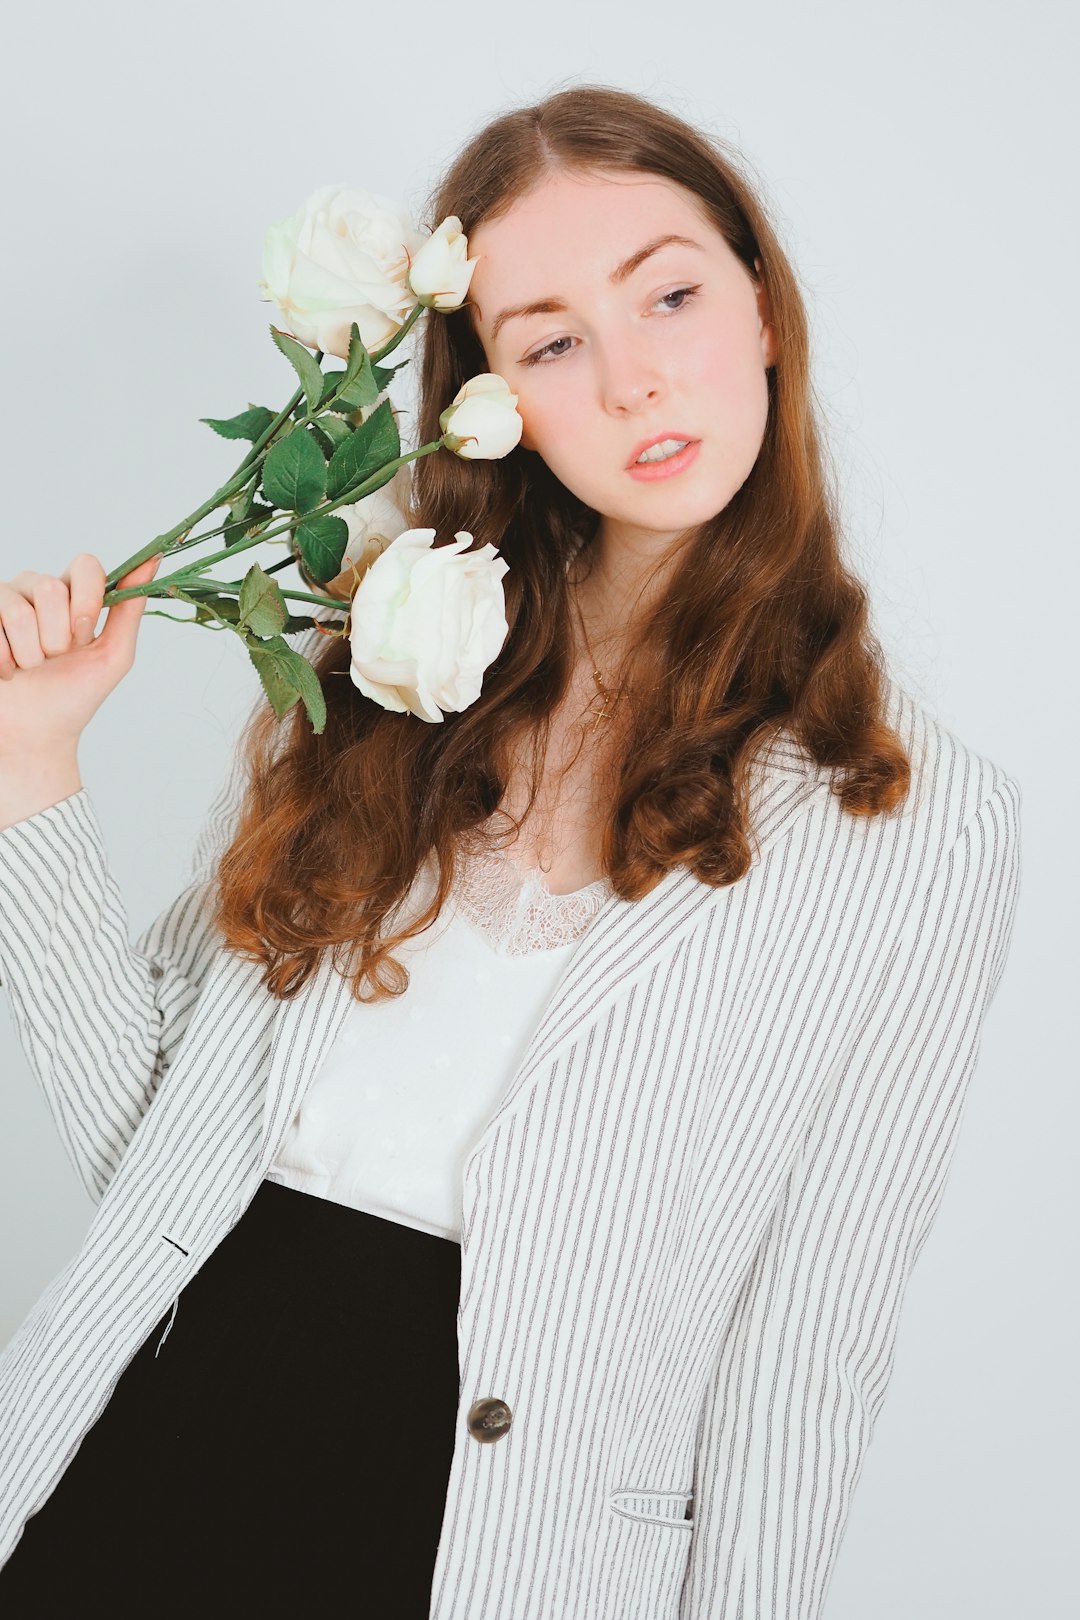 woman in white and black striped long sleeve shirt holding white rose